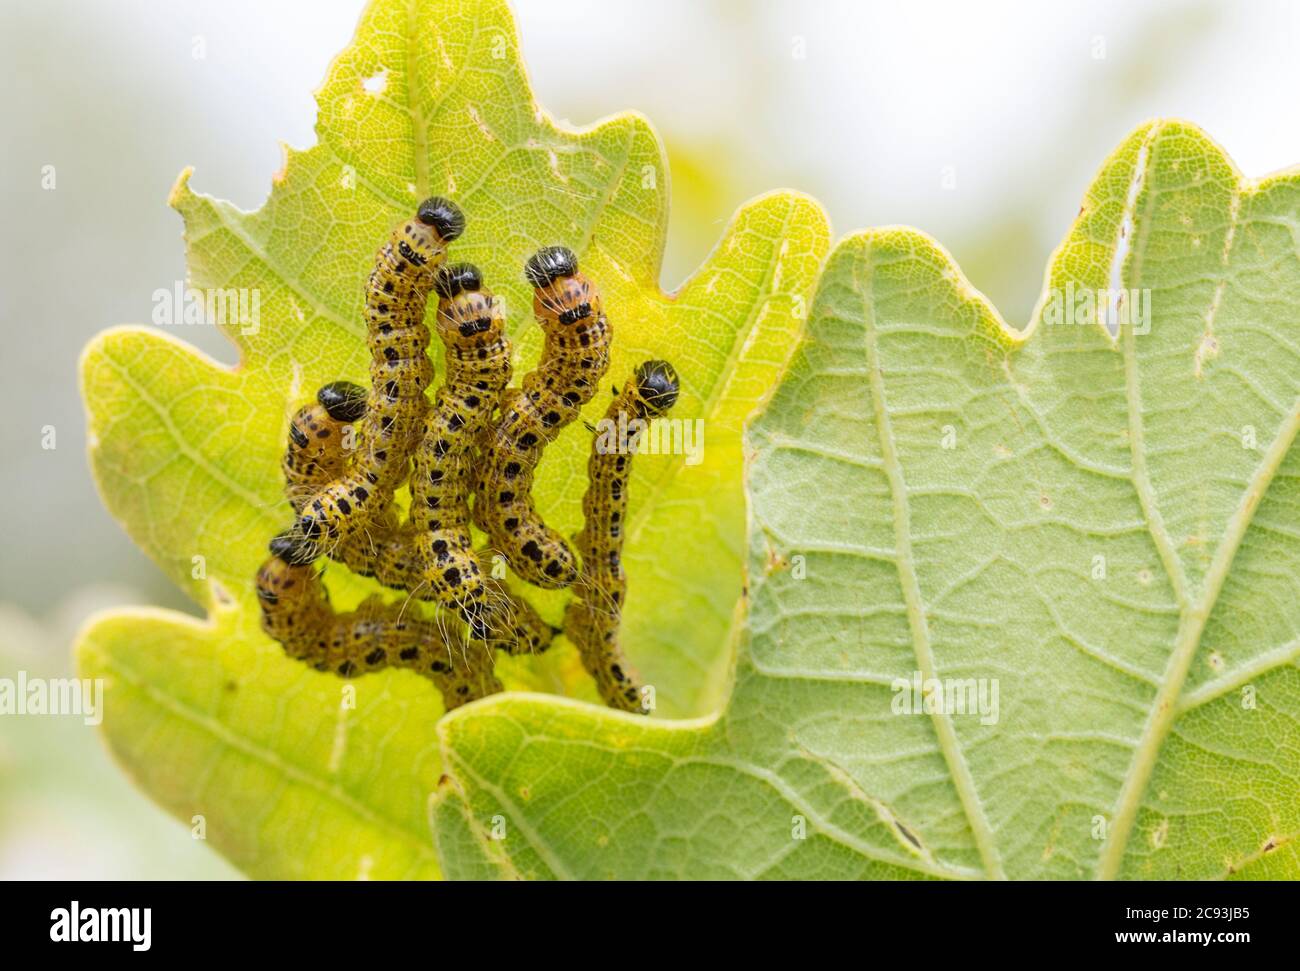 Yellow caterpillars with rows of black dots a black head and long fine hairs bunched in groups on the underside of leaves great white butterfly Stock Photo